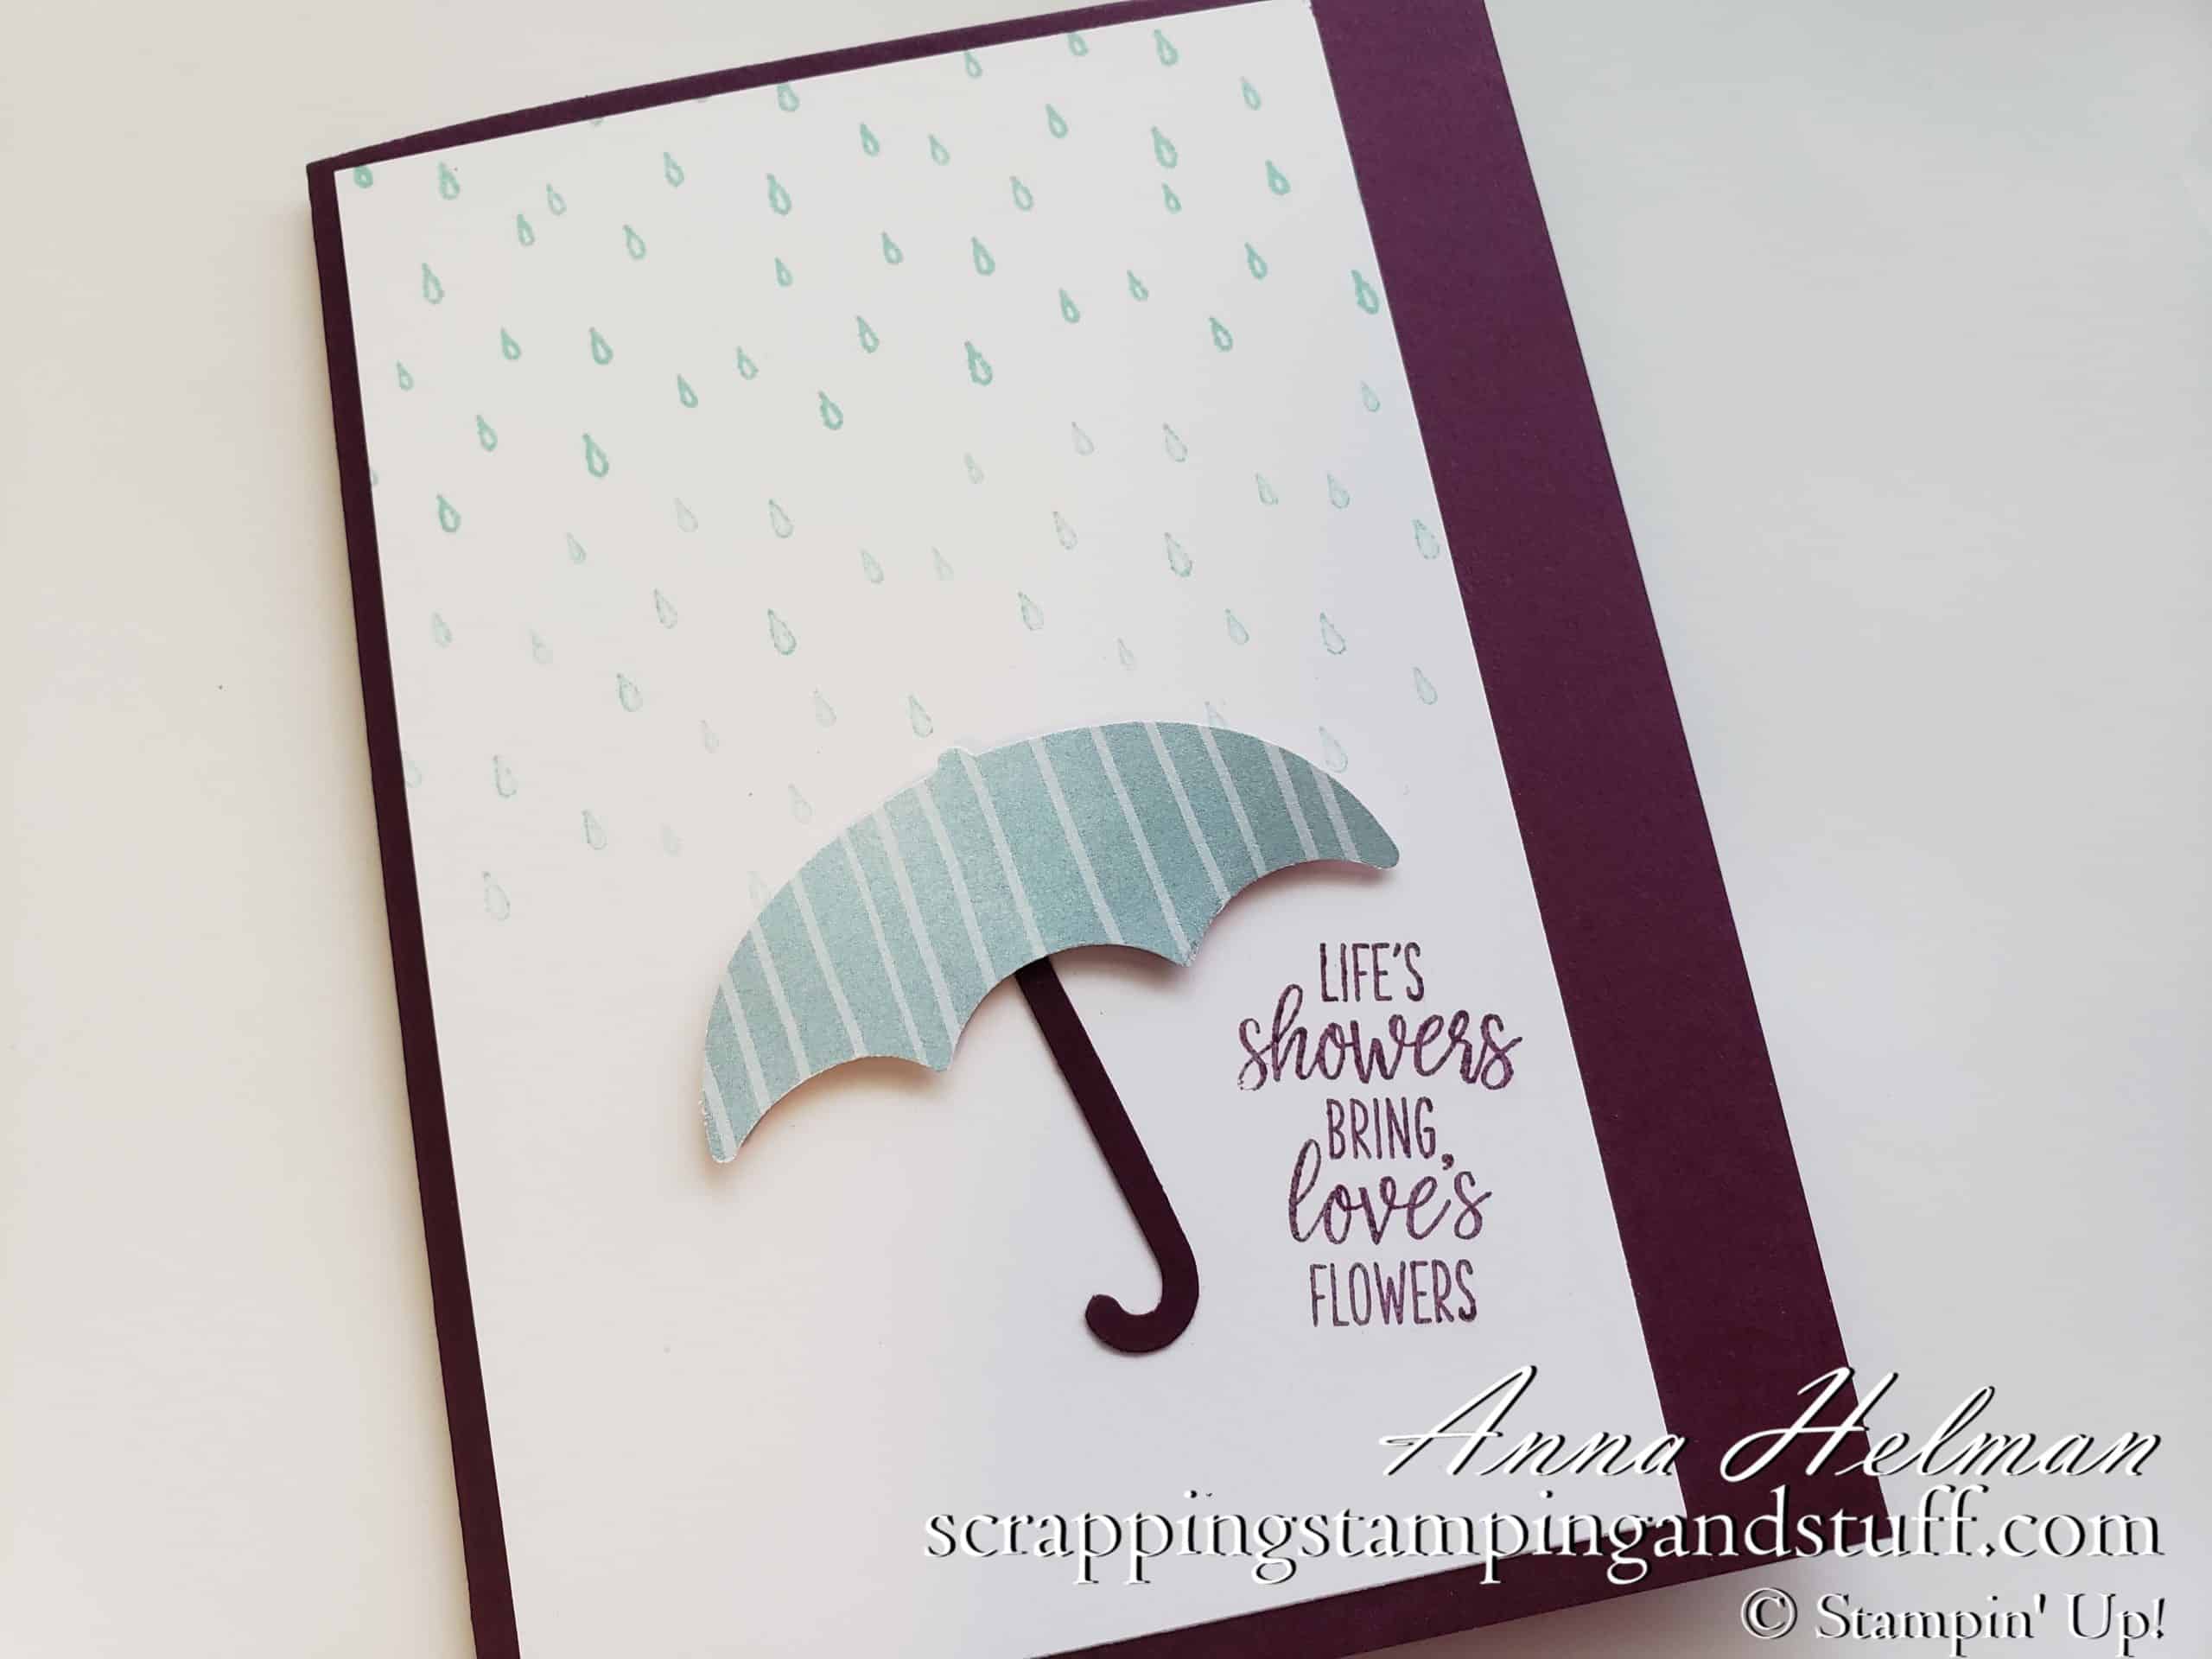 New Umbrella Stamp and Punch Set!